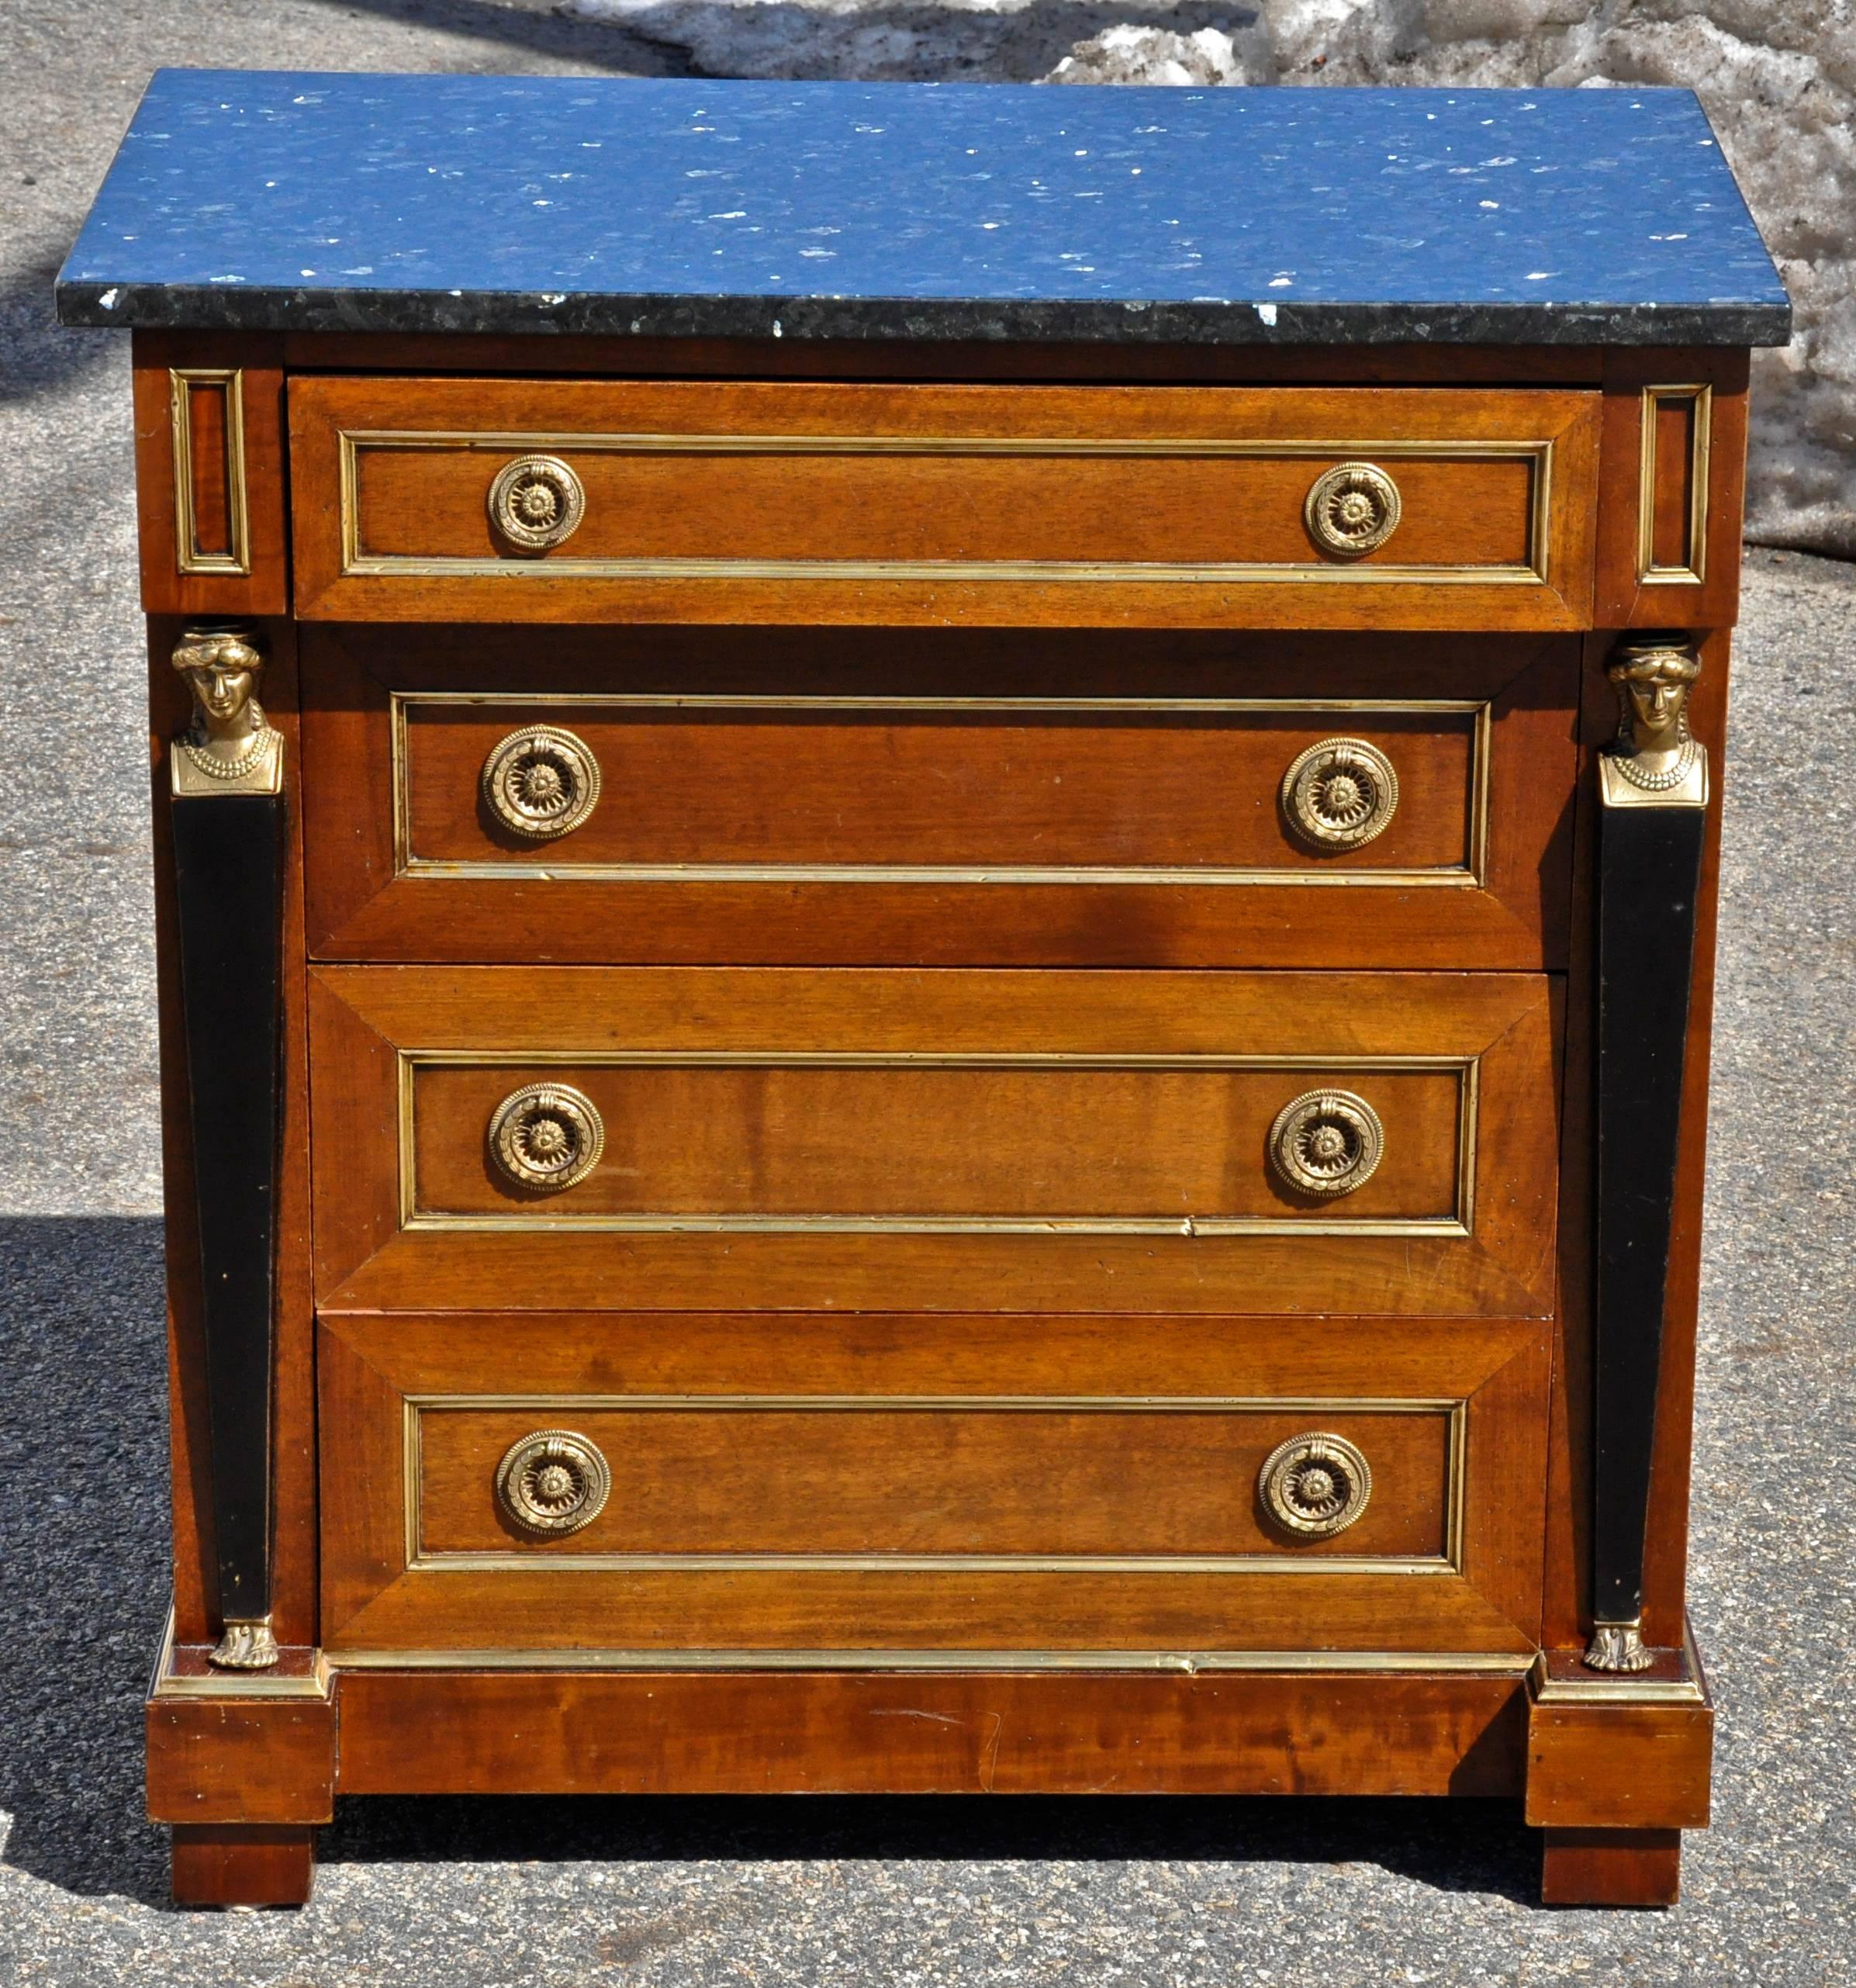 Pair of French Empire or Regency chest of drawers or commodes

Four brass trimmed drawers, neoclassical brass and ebonized caryatids flanking on each side, beautiful matching black granite tops




 